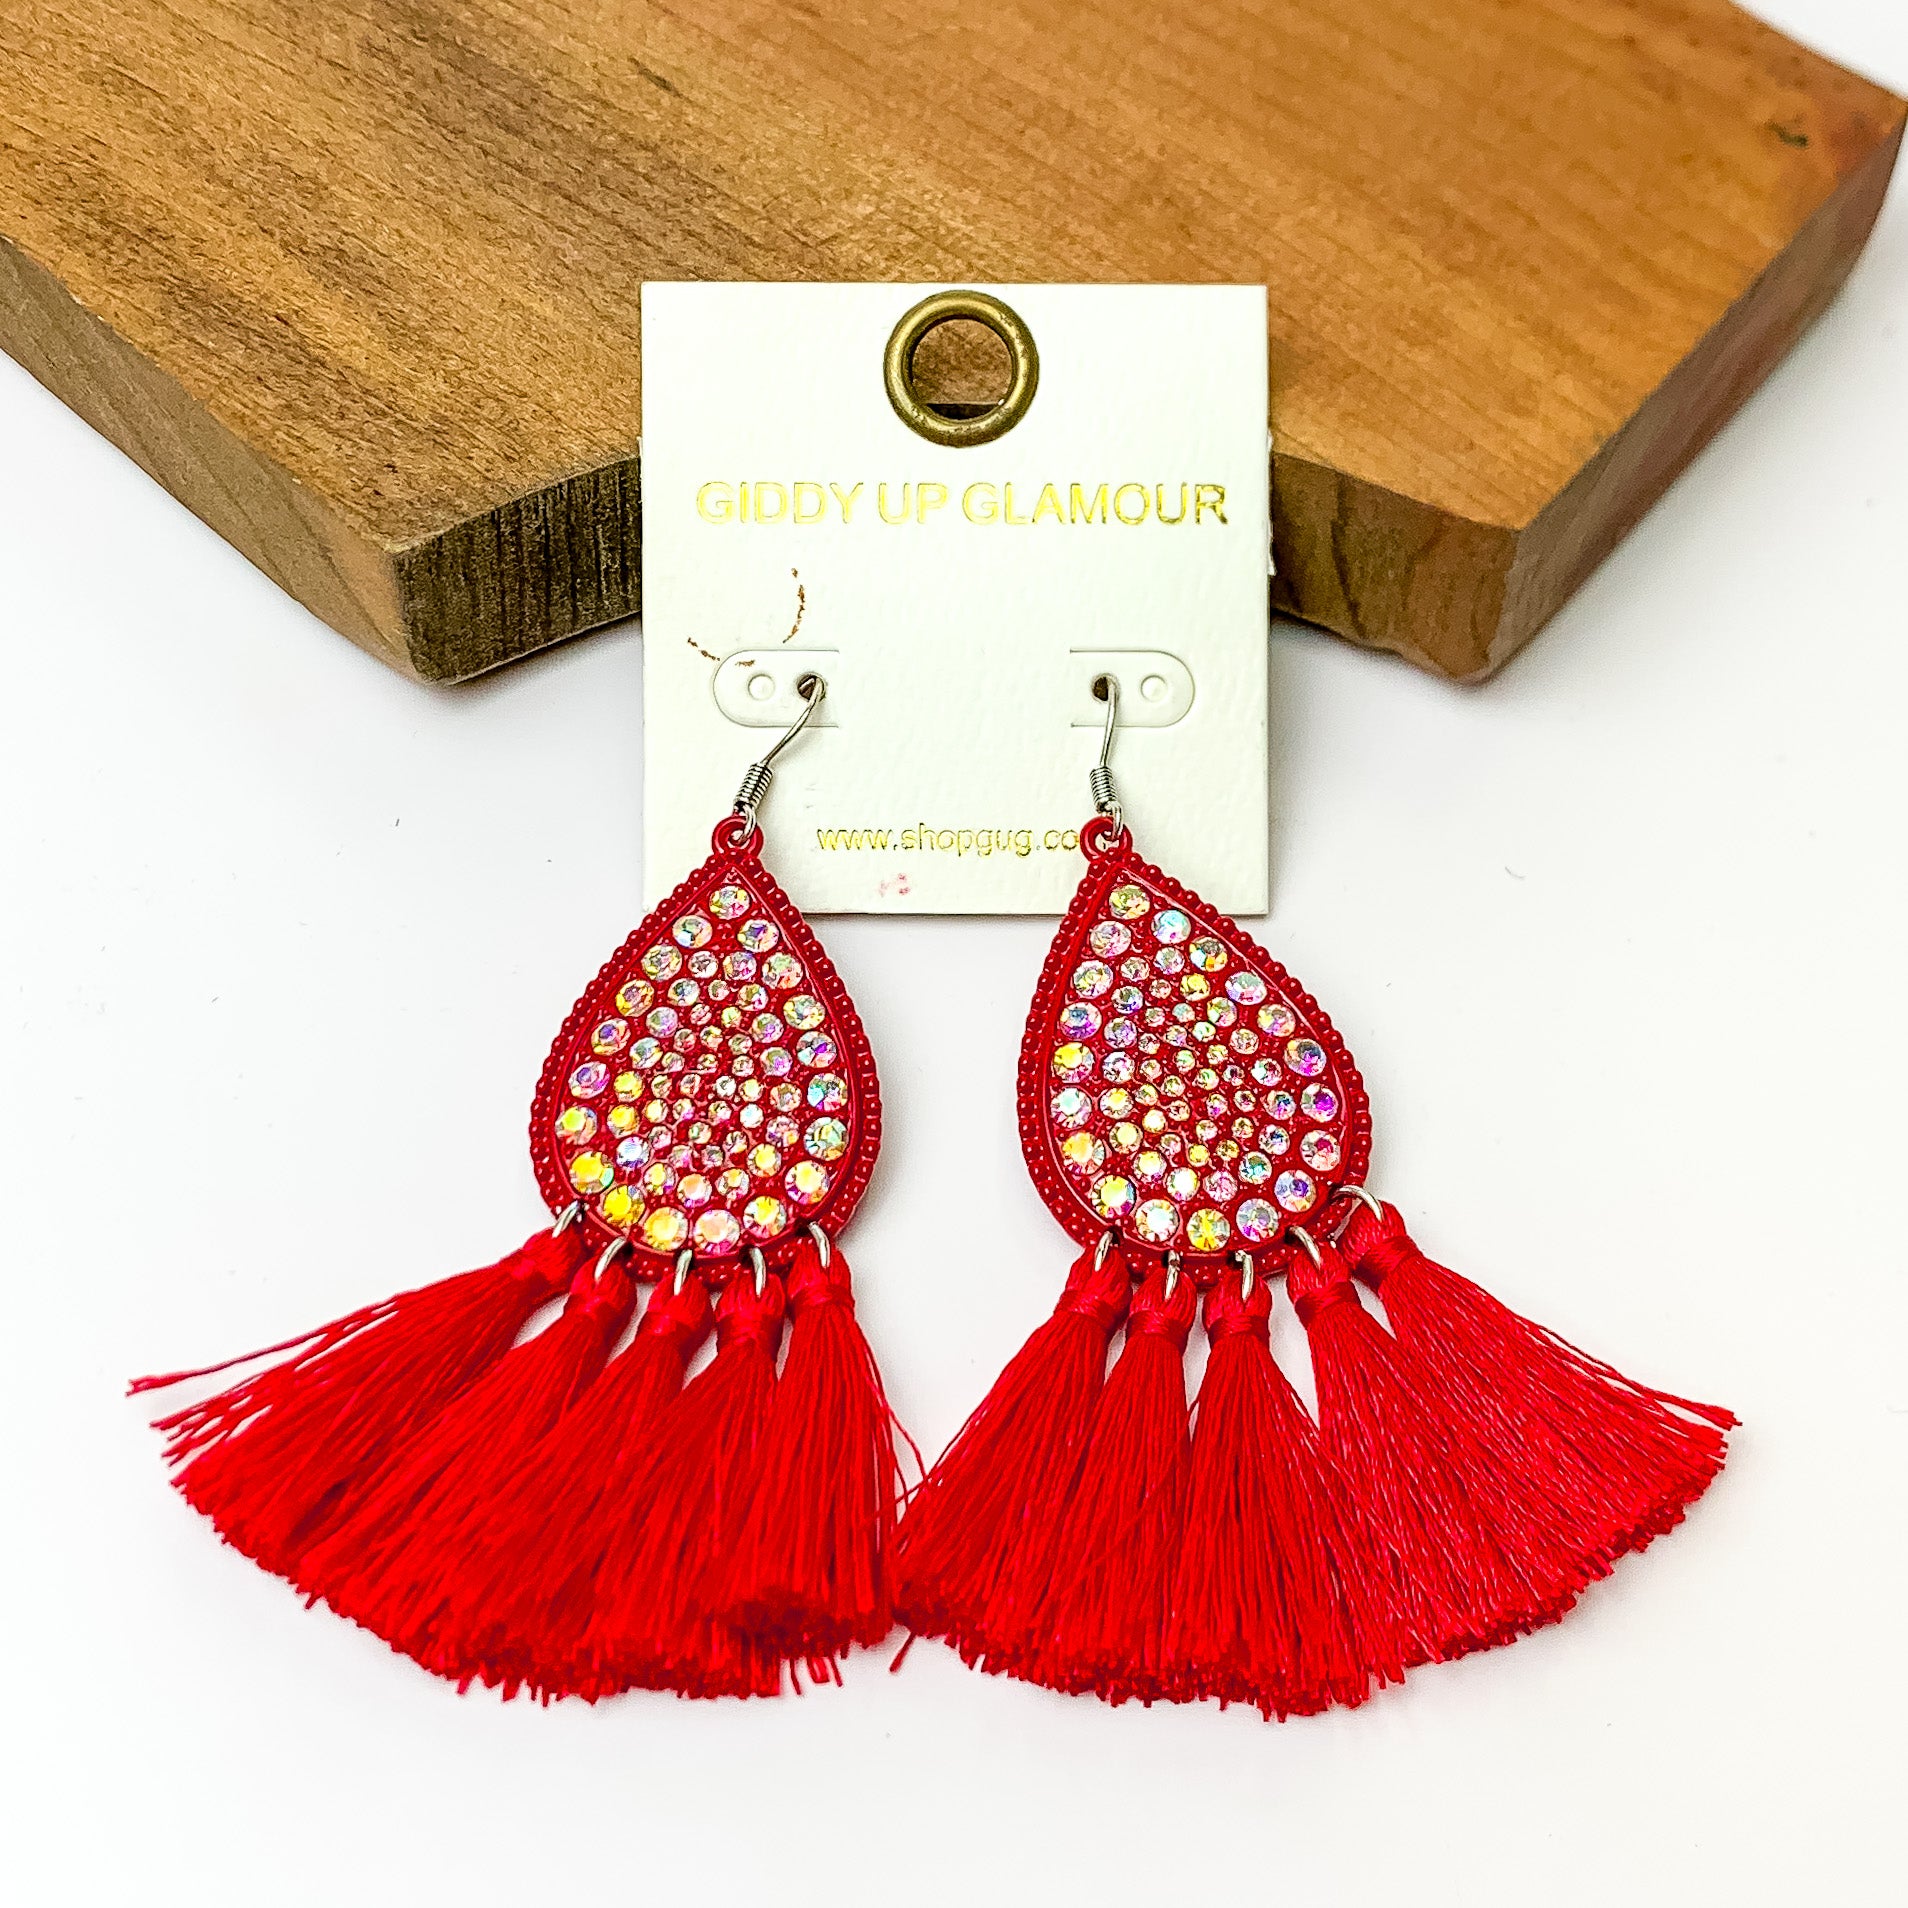 AB Crystal Teardrop Earrings with Tassel Trim in Red - Giddy Up Glamour Boutique